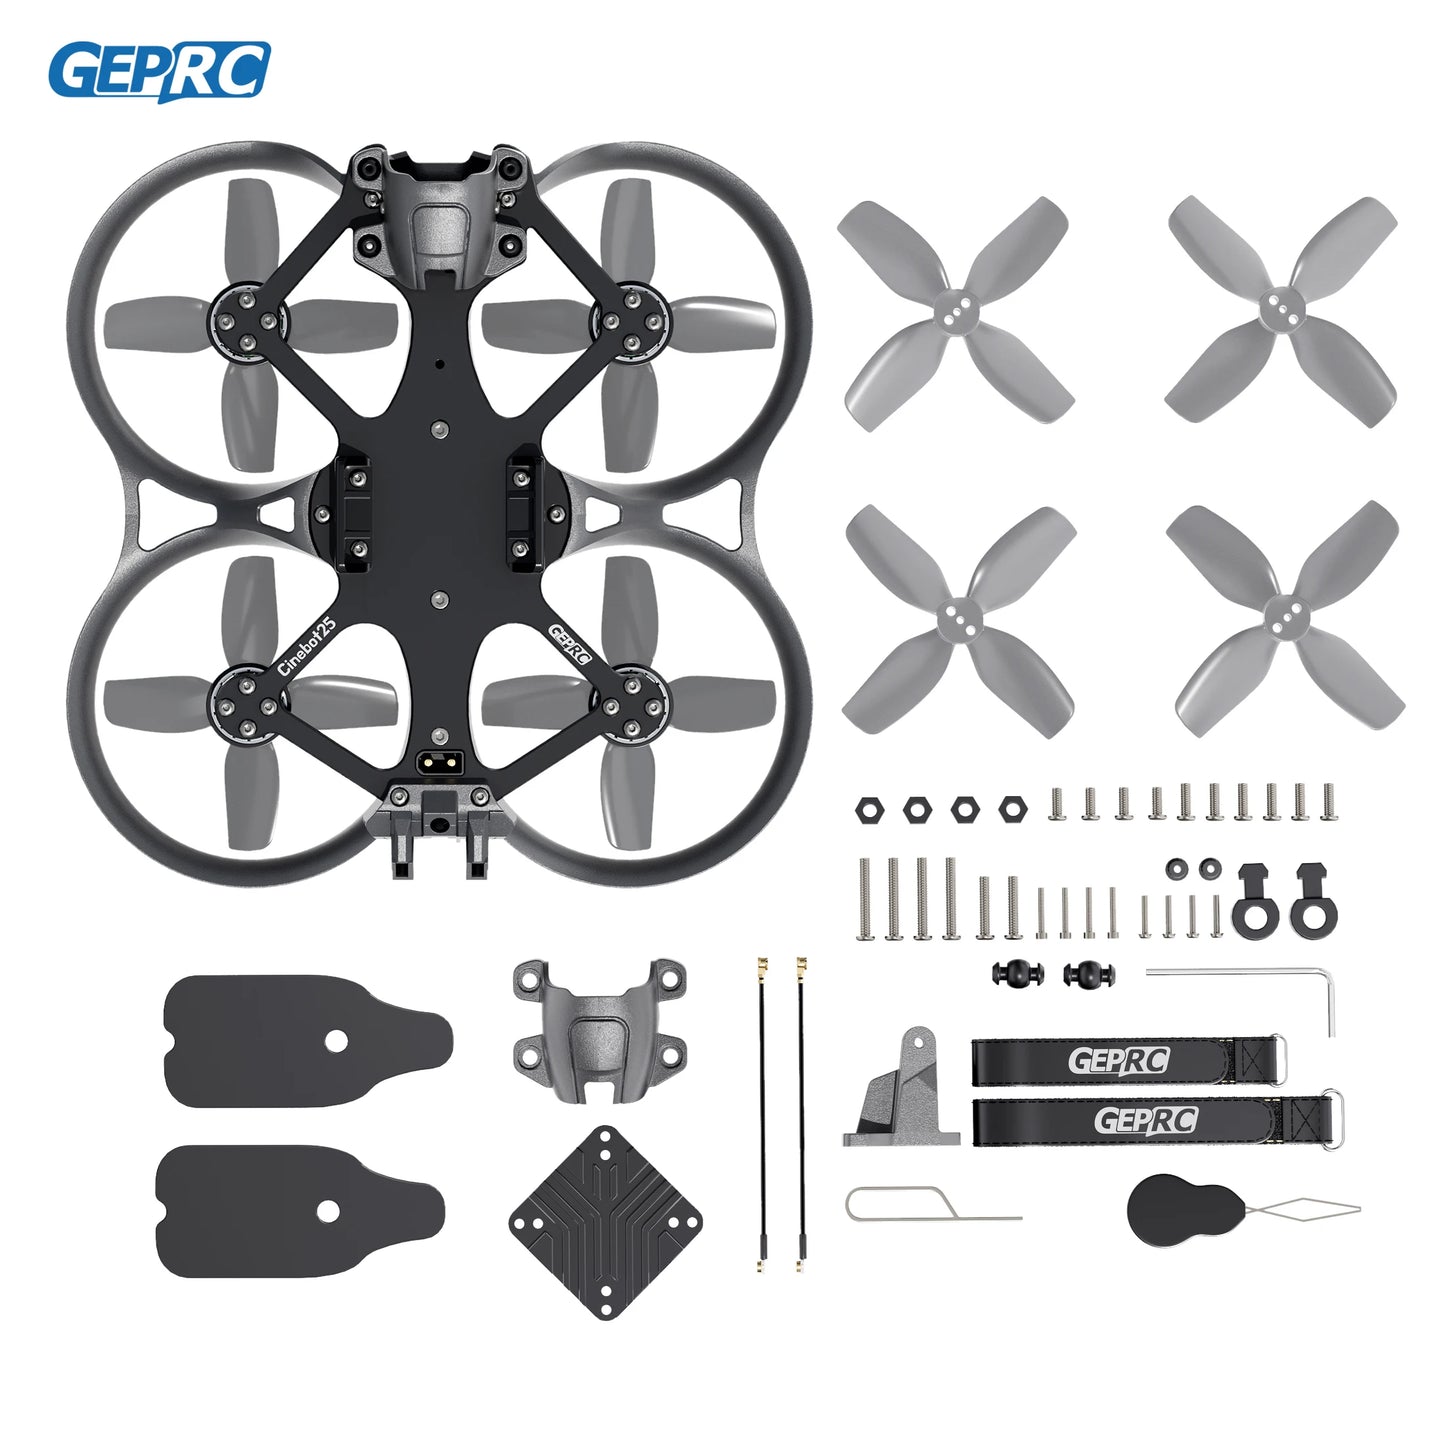 GEPRC Cinebot25 WTFPV FPV Drone - 2.5inch Racing Freestyle Quadcopter 138g With TAKERG4AIO G4 45A AIO SPEEDX2 1404 4600KV Motor